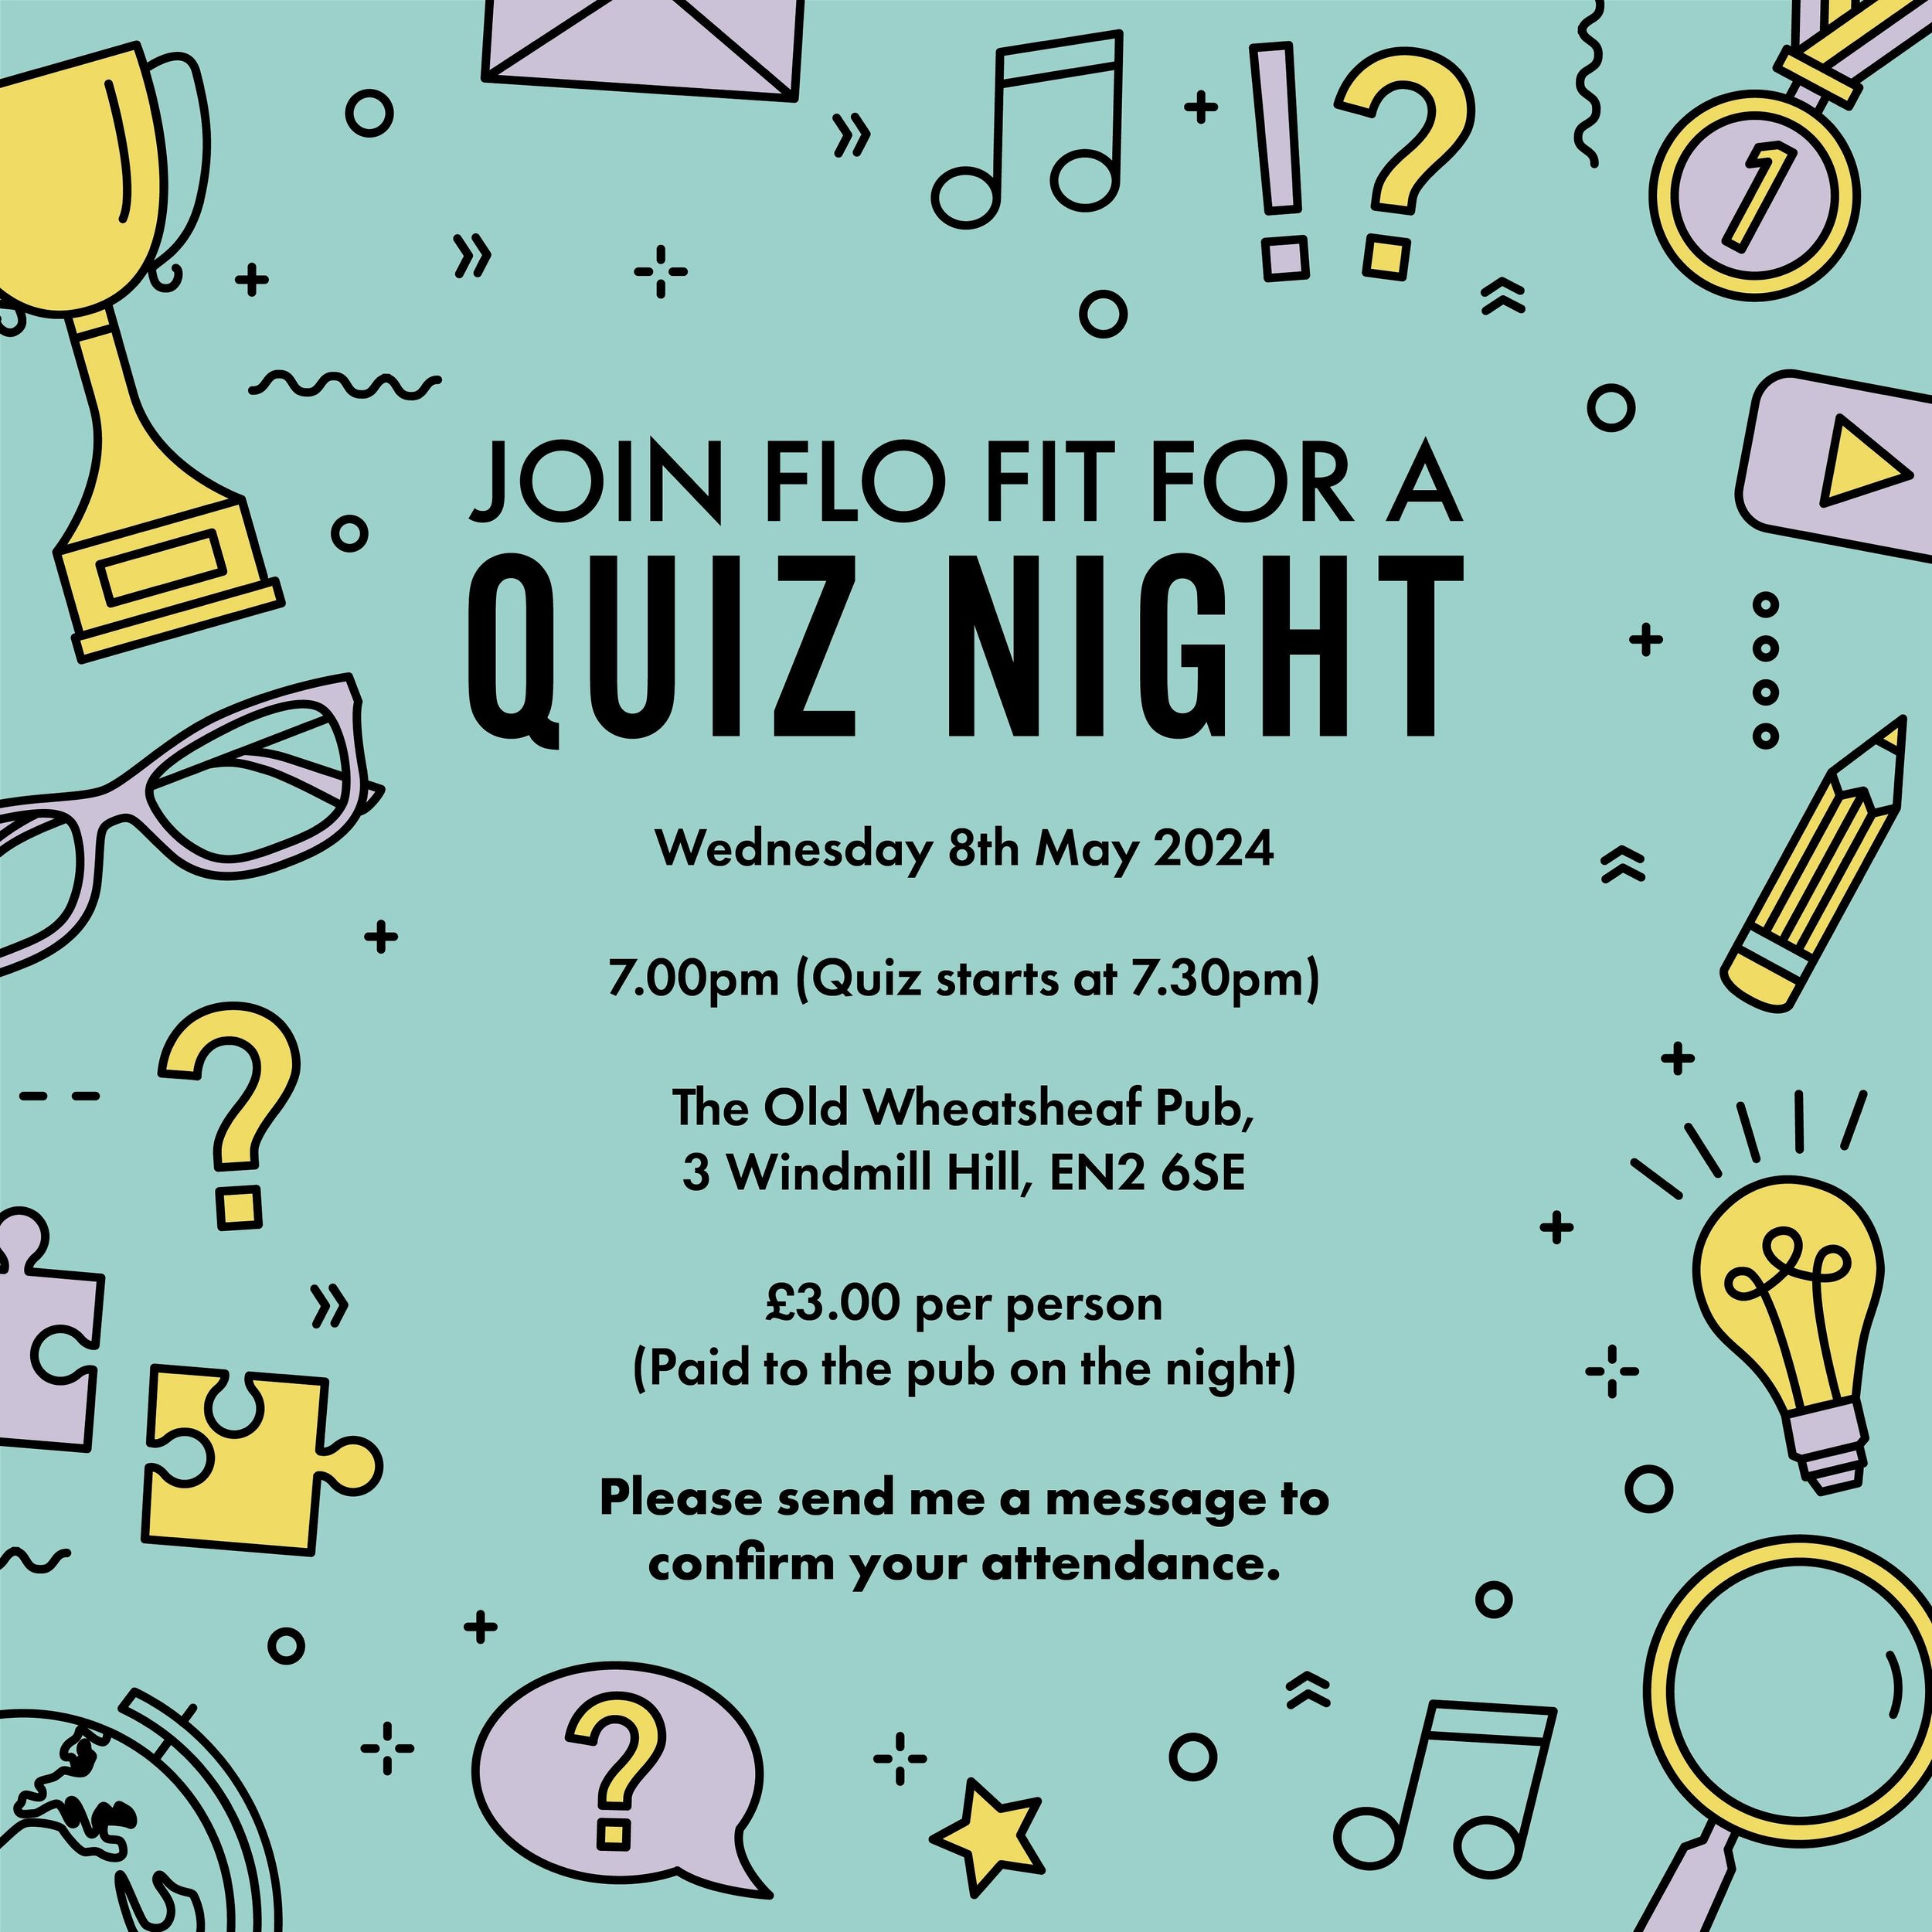 As the Christmas cream tea in December was a success, I thought it only made sense to organise another social event! This time a Quiz Night! 🤔

📆 Wednesday 8th May 2024
⏰ 7.00pm (Quiz starts at 7.30pm)
📍 The Old Wheatsheaf, 3 Windmill Hill, Enfiel